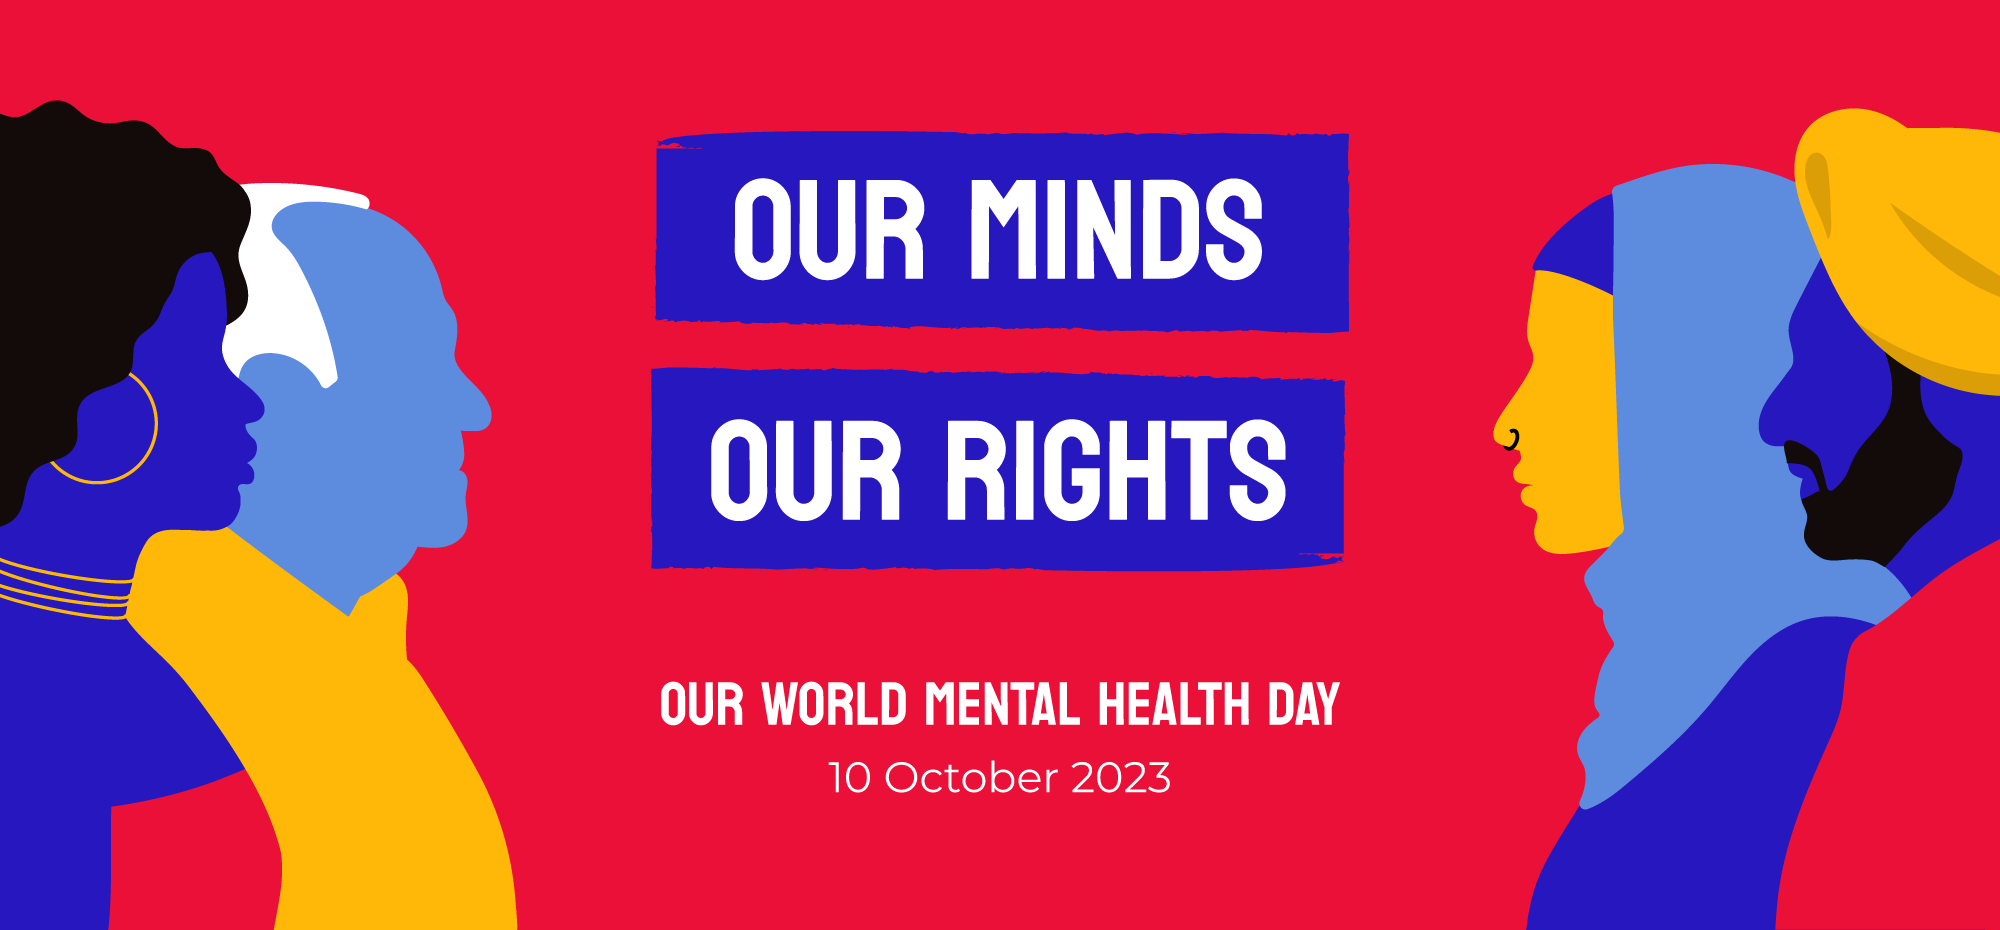 Web banners for World Mental Health Day